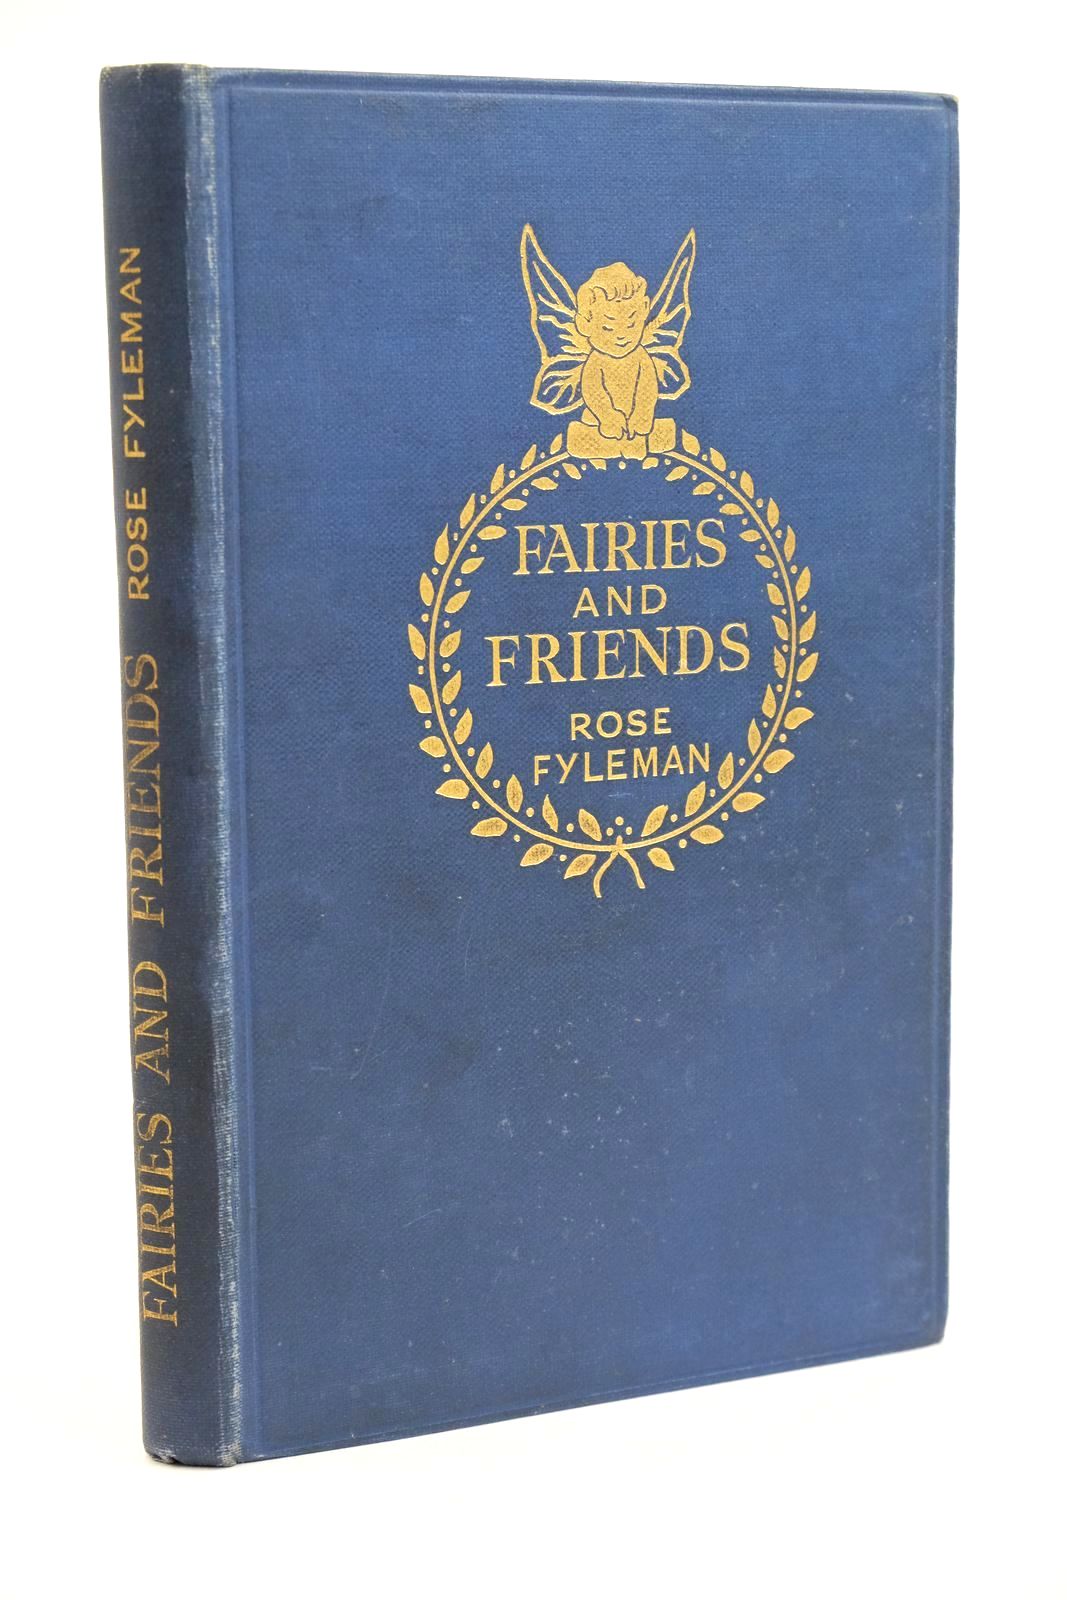 Photo of FAIRIES AND FRIENDS written by Fyleman, Rose published by Methuen &amp; Co. Ltd. (STOCK CODE: 1323233)  for sale by Stella & Rose's Books